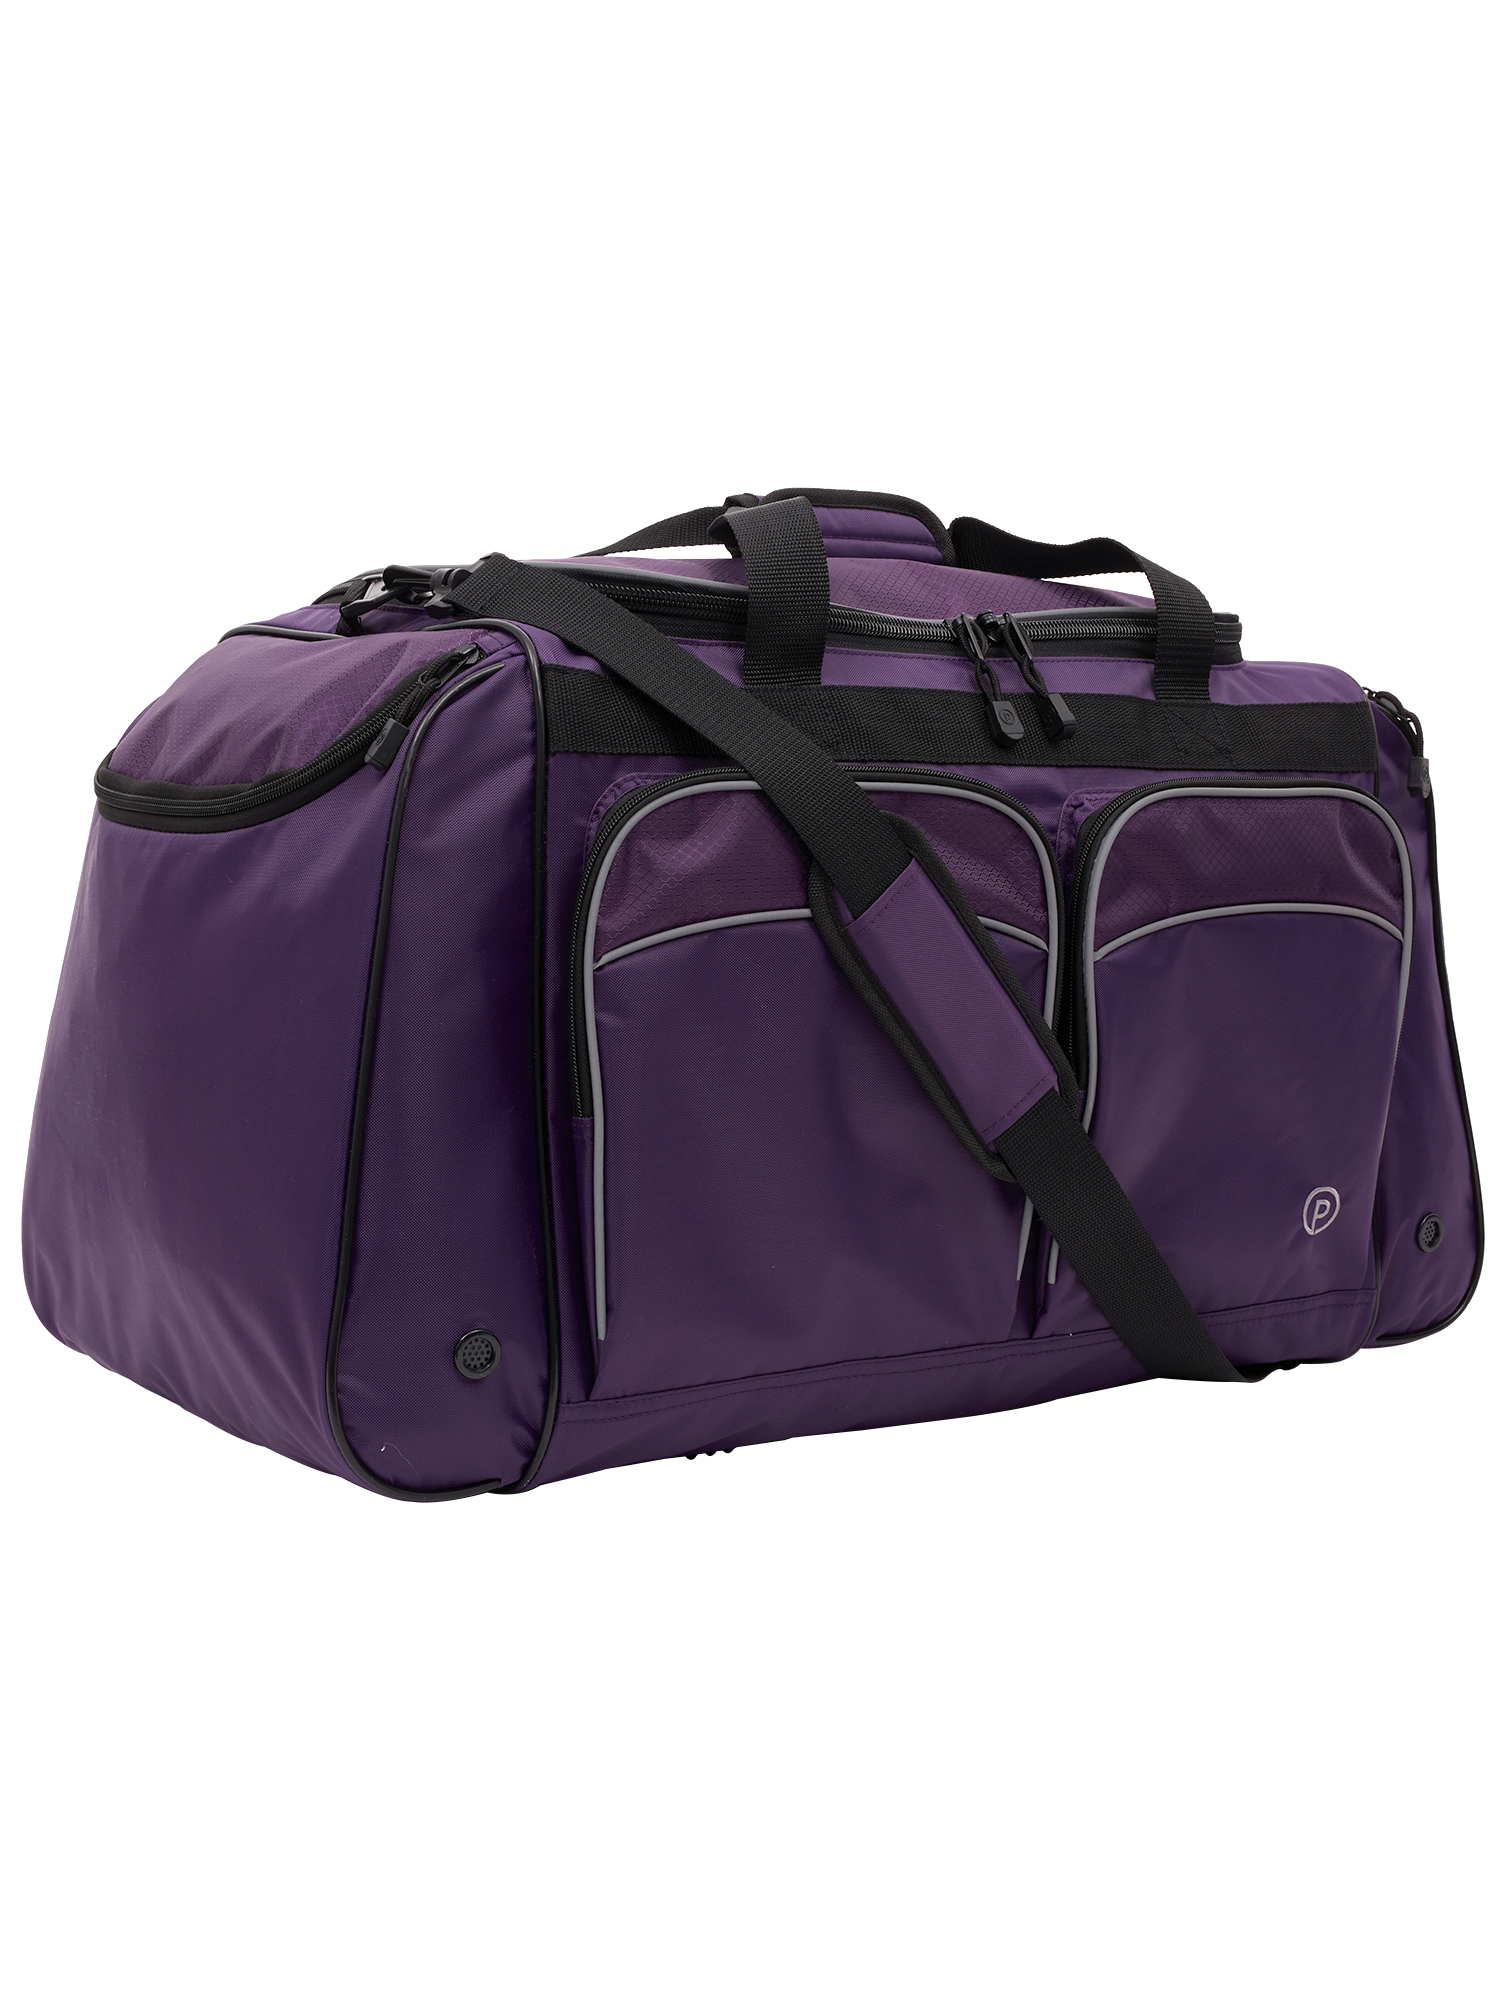 Protege 28" Polyester Sport Travel Duffel Bag, Purple - image 3 of 8